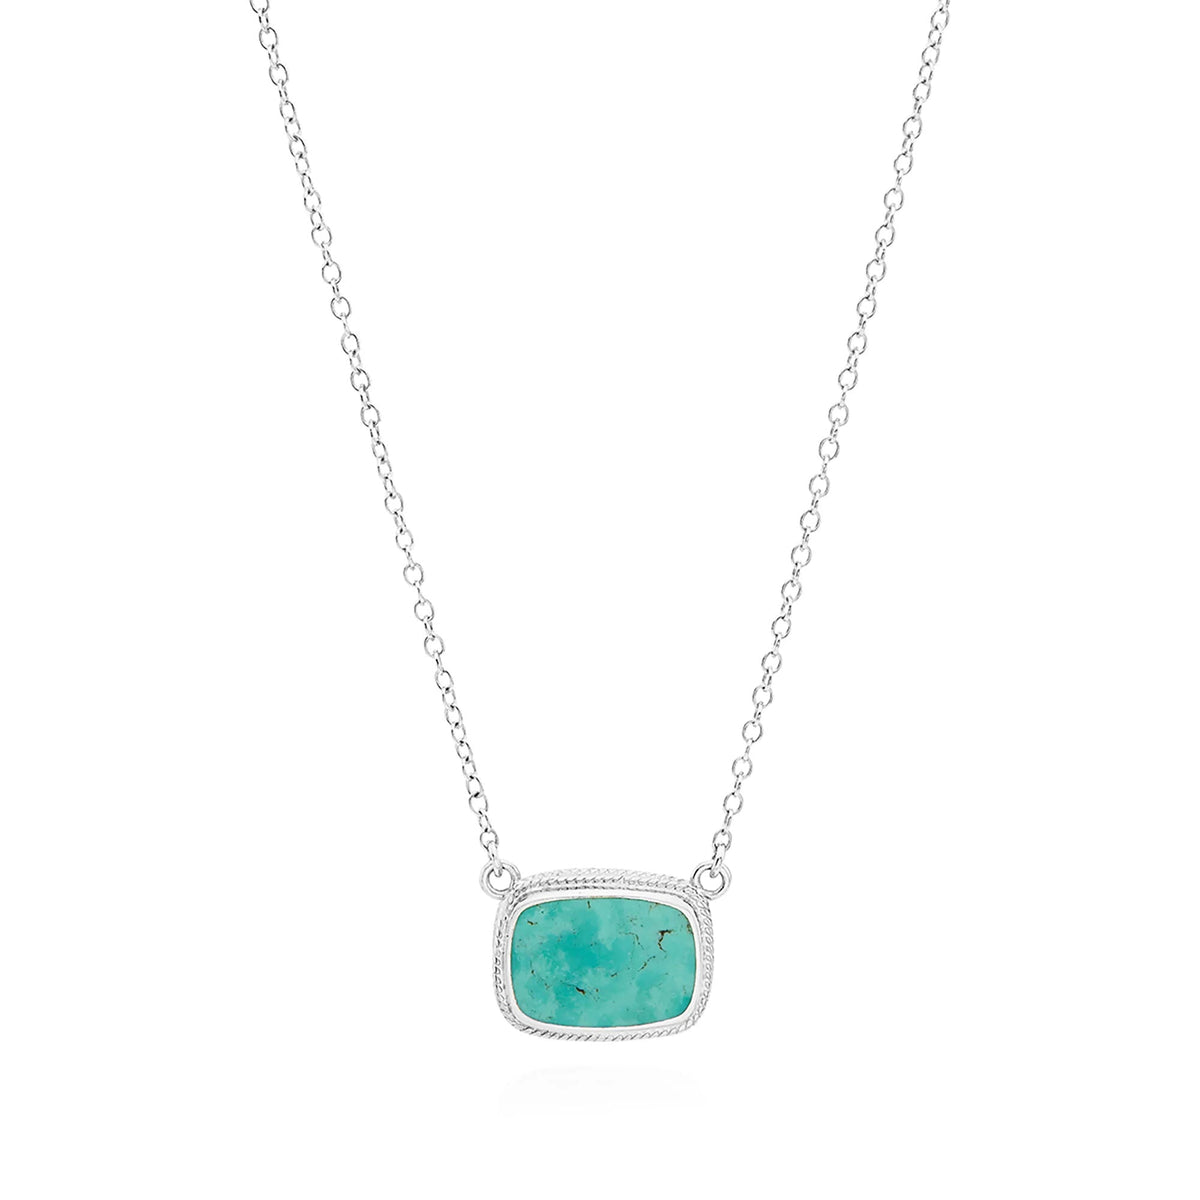 Anna Beck Medium Turquoise Cushion Necklace - Silver